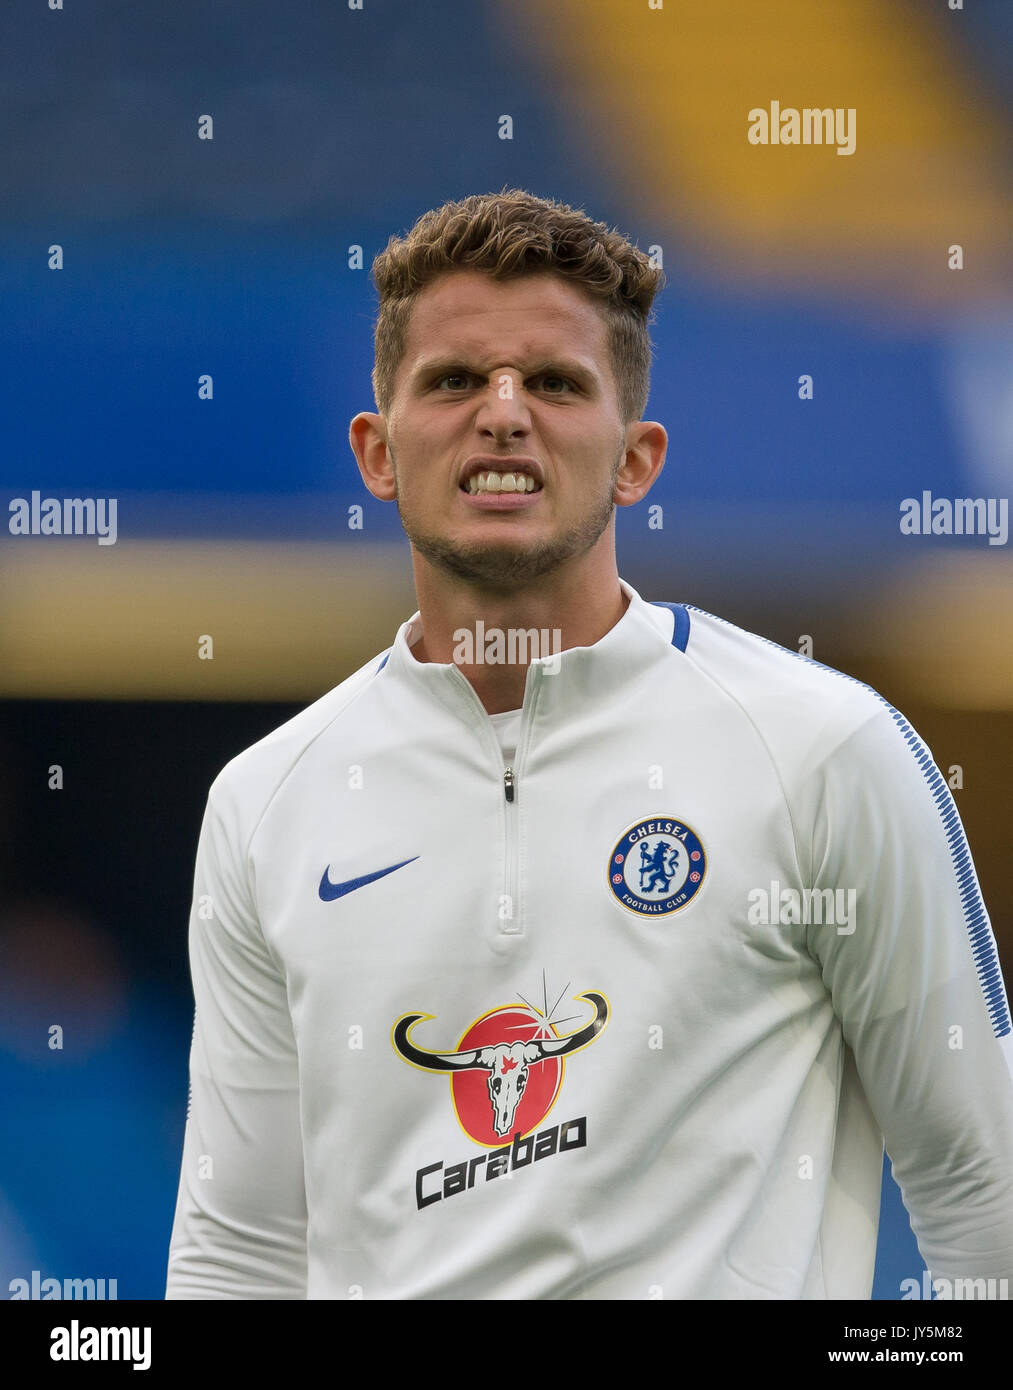 London, UK. 18th Aug, 2017.   Jordan HOUGHTON of Chelsea warms up during the U23 Premier League 2 match between Chelsea and Derby County at Stamford Bridge, London, England on 18 August 2017. Photo by Andy Rowland. **EDITORIAL USE ONLY FA Premier League and Football League are subject to DataCo Licence. Credit: Andrew Rowland/Alamy Live News Credit: Andrew Rowland/Alamy Live News Stock Photo